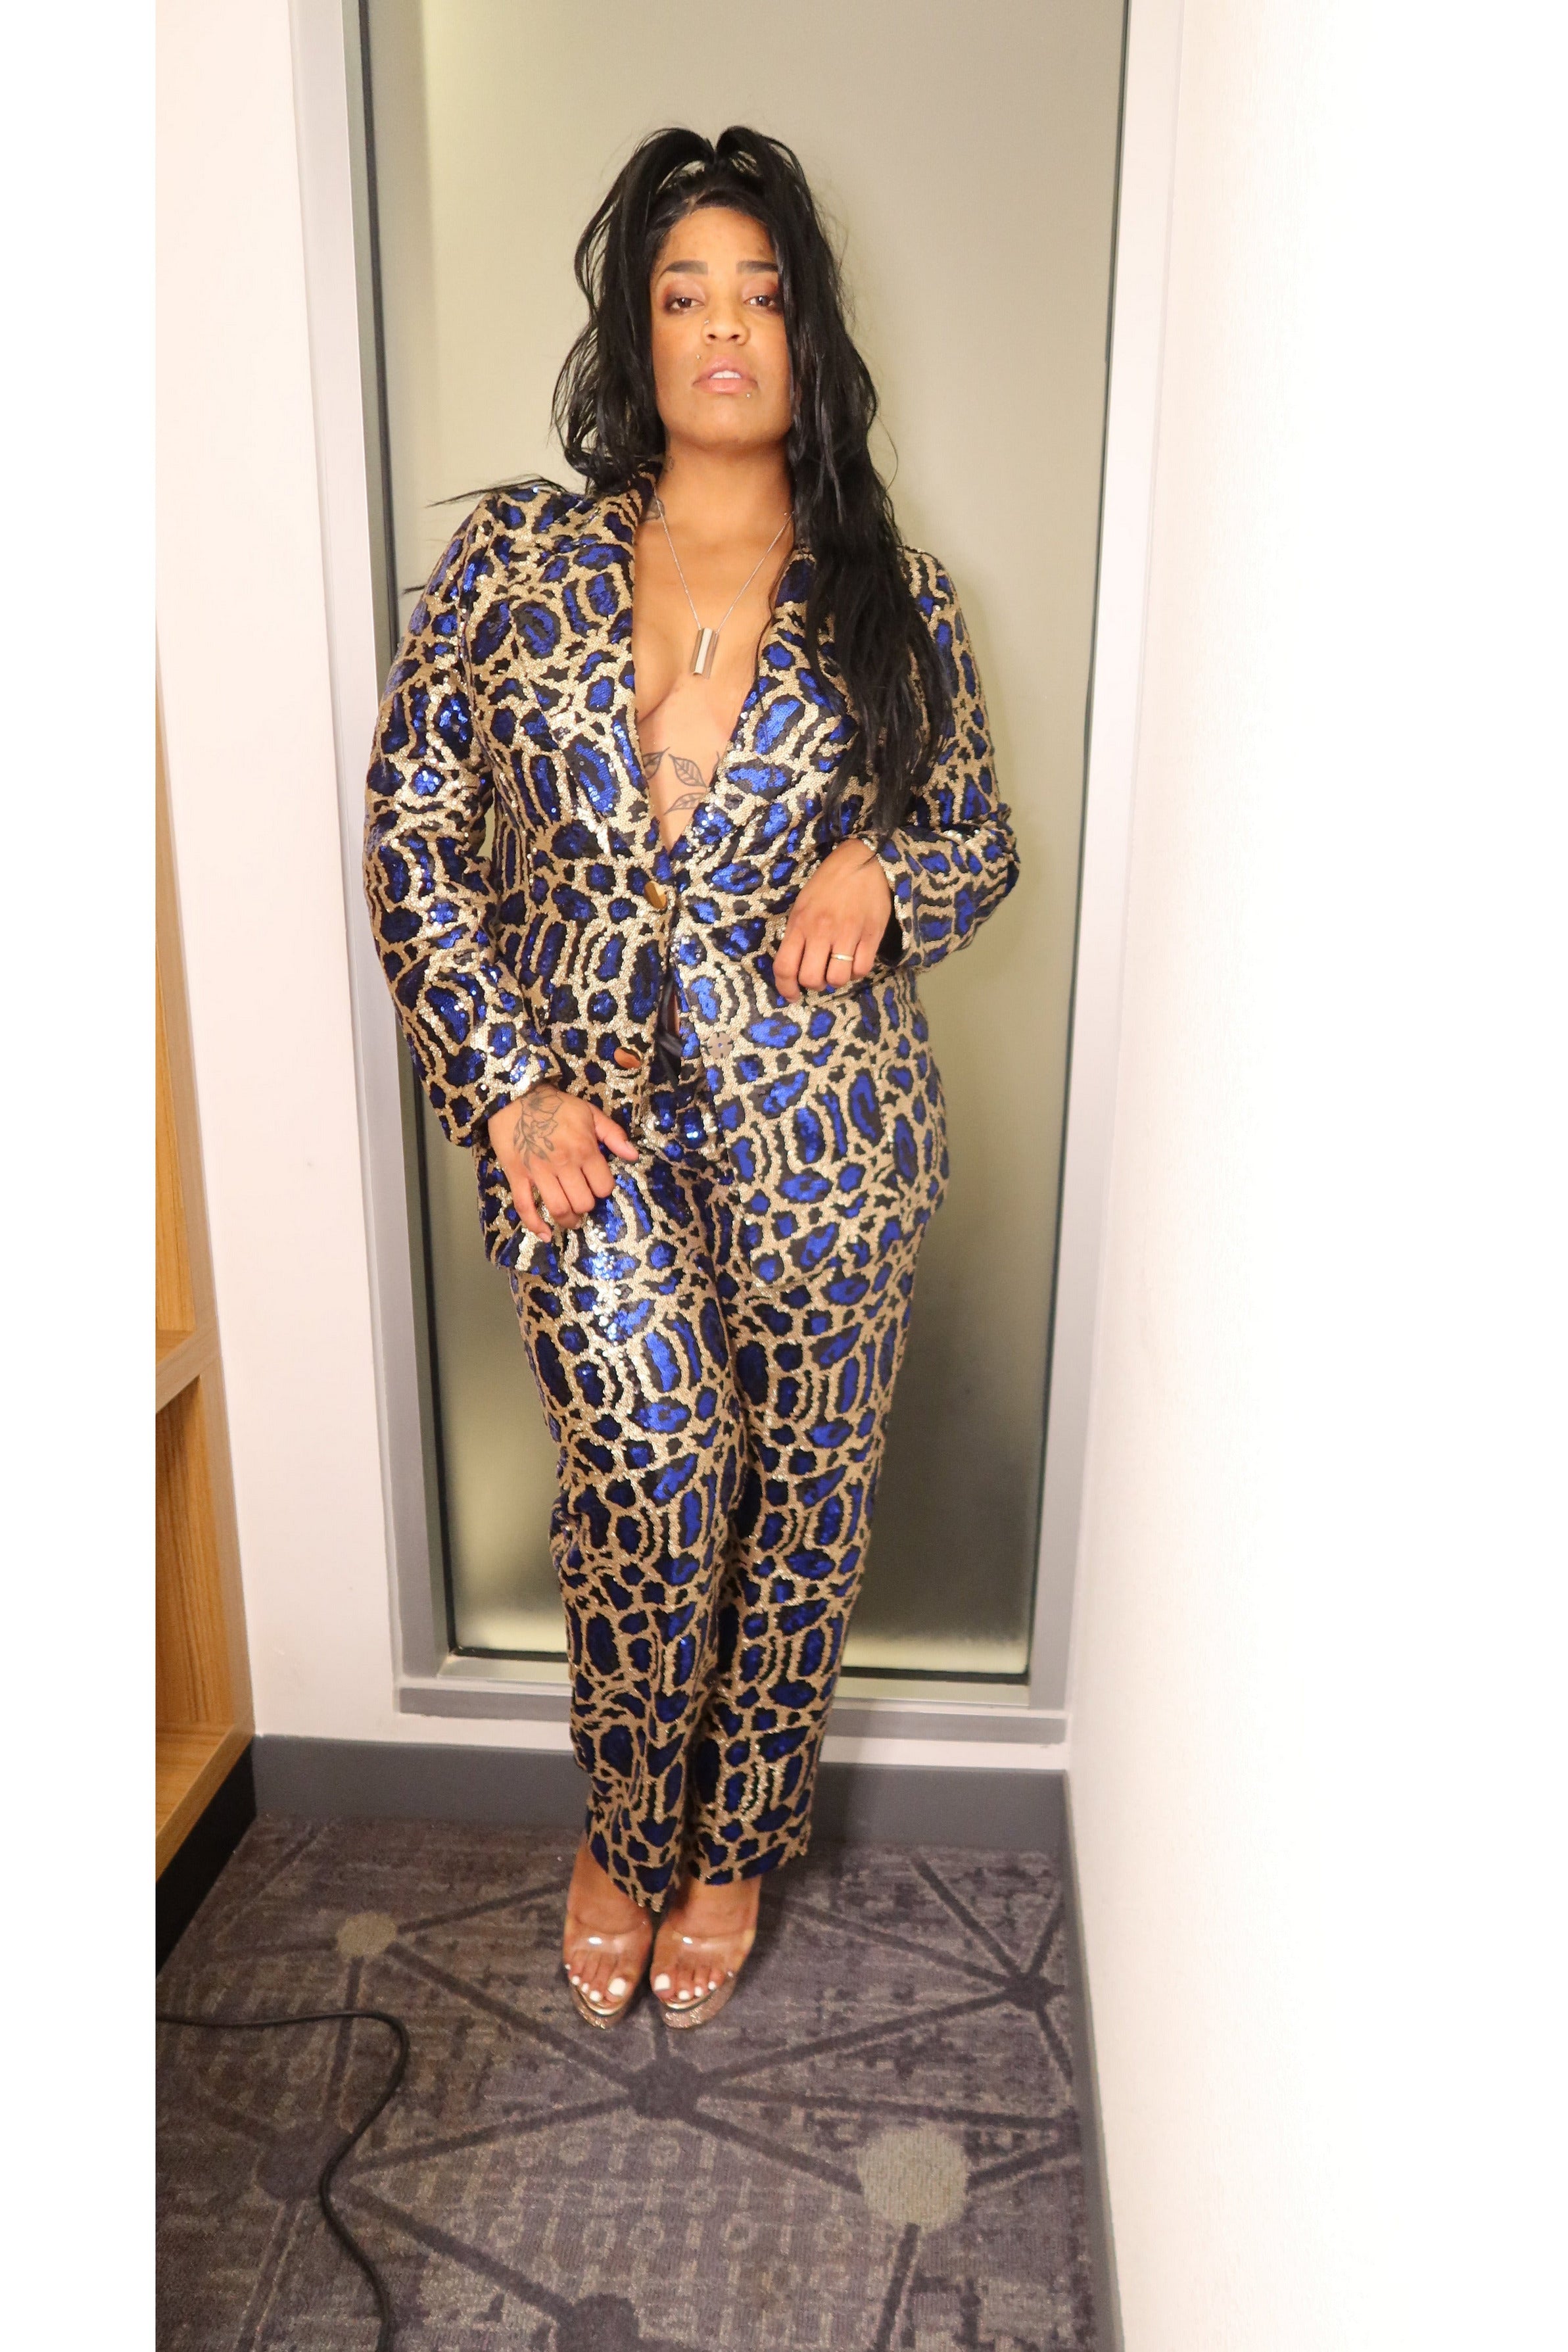 SHE IS READY FOR THE HOLIDAY'S - ROYAL BLUE AND GOLD SEQUENCE PANT SUIT